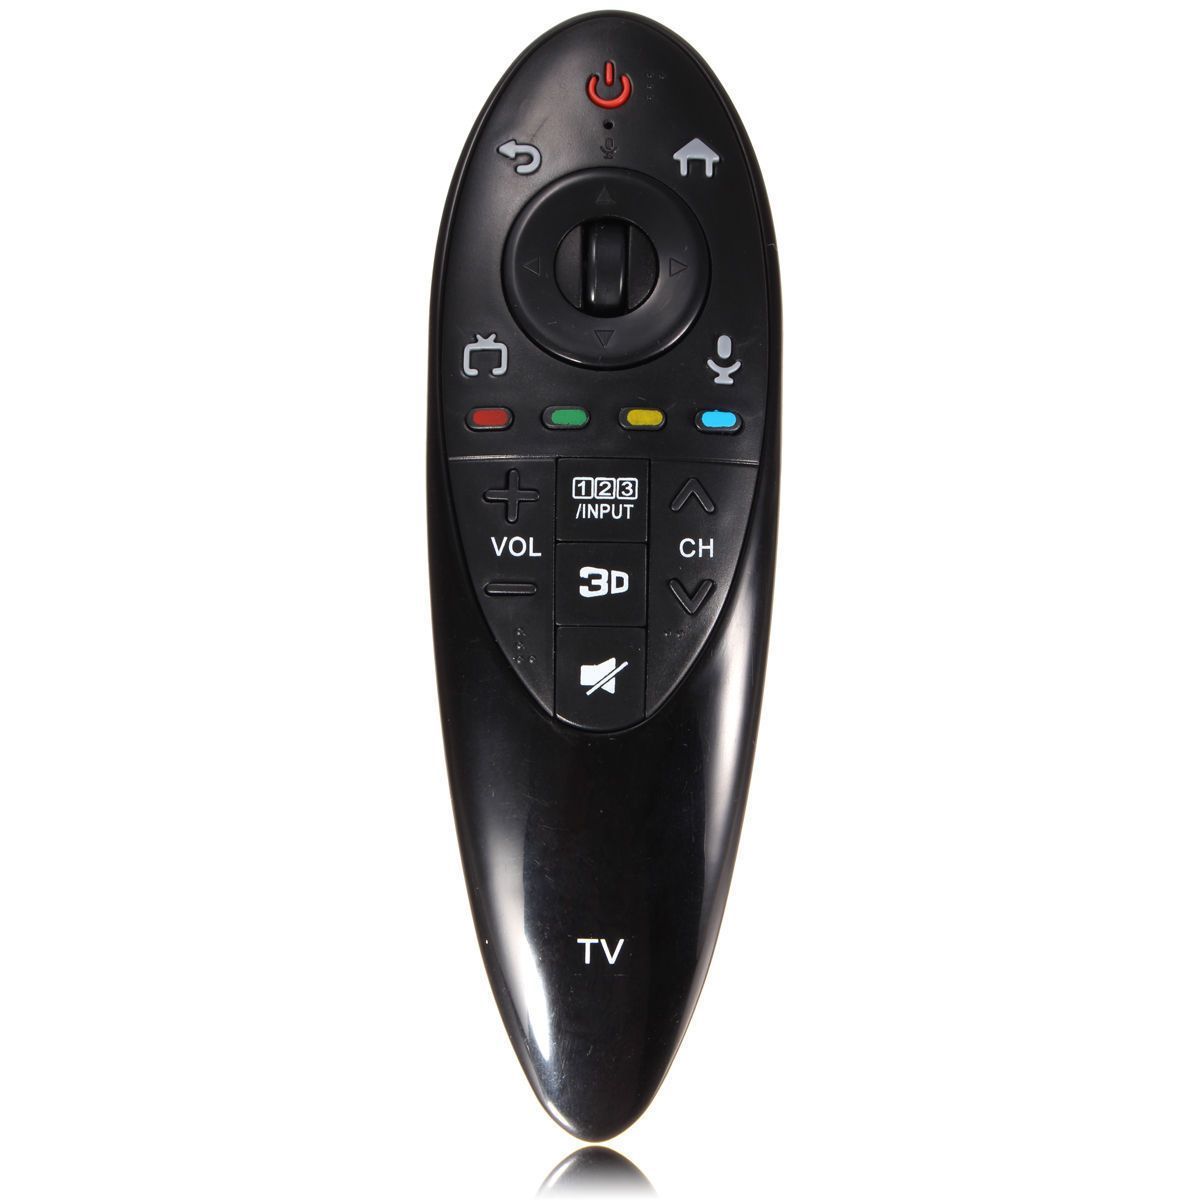 AN-MR500G AN-MR500 Remote Control Replacement for LG Magic Motion LED LCD Smart TV